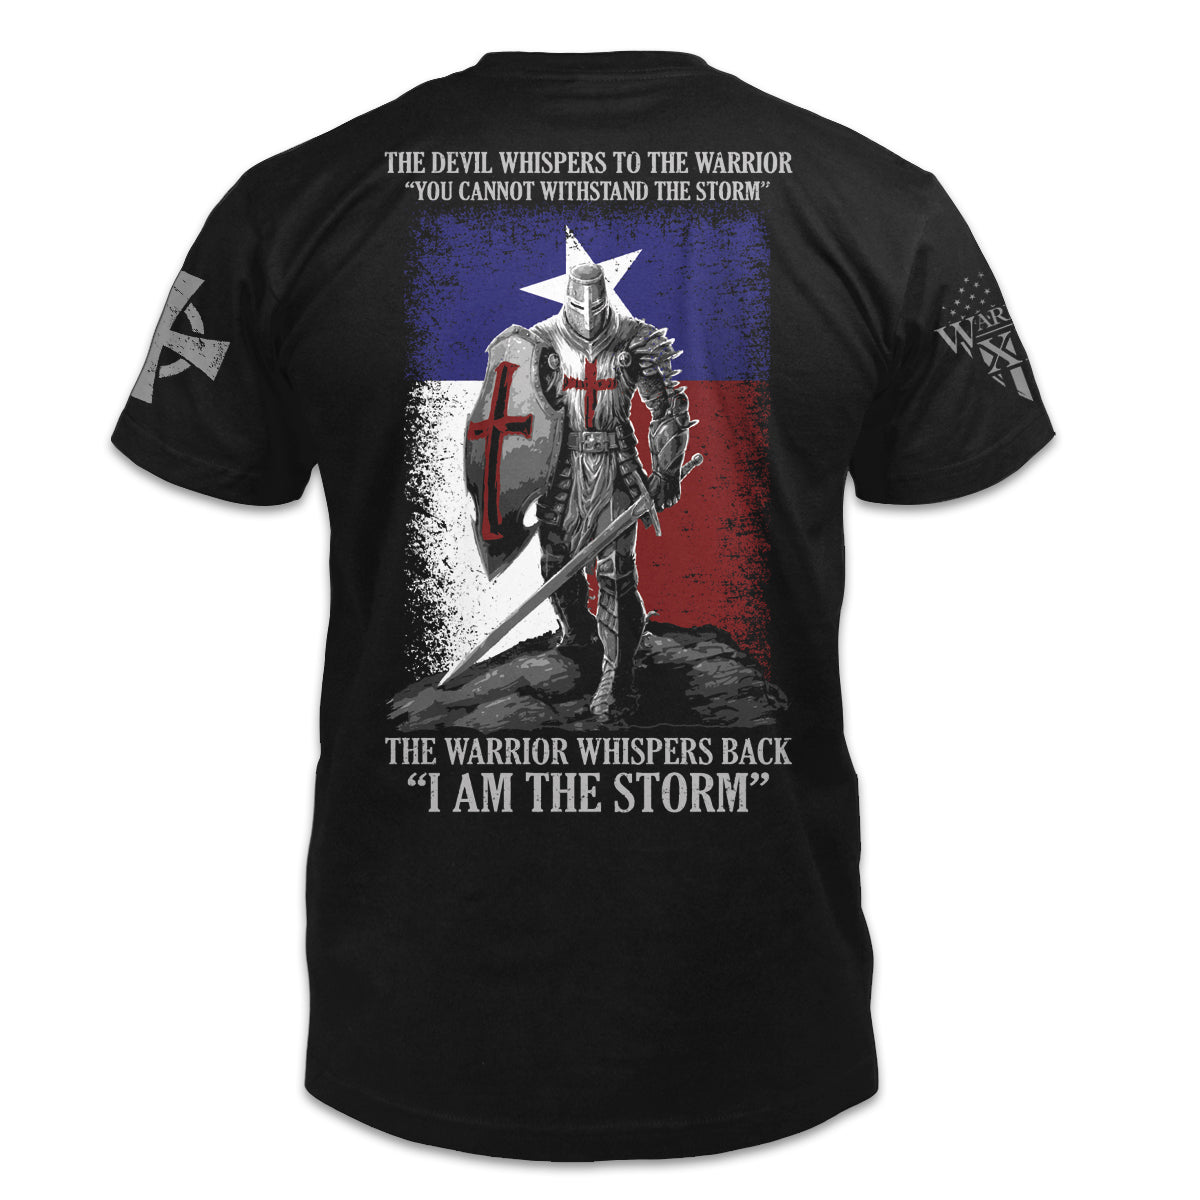 A black t-shirt with the words "The Devil whispers to the Warrior, "You cannot withstand the storm." The Warrior whispers back‚ "I am the storm." with a warrior printed on the back of the  shirt.